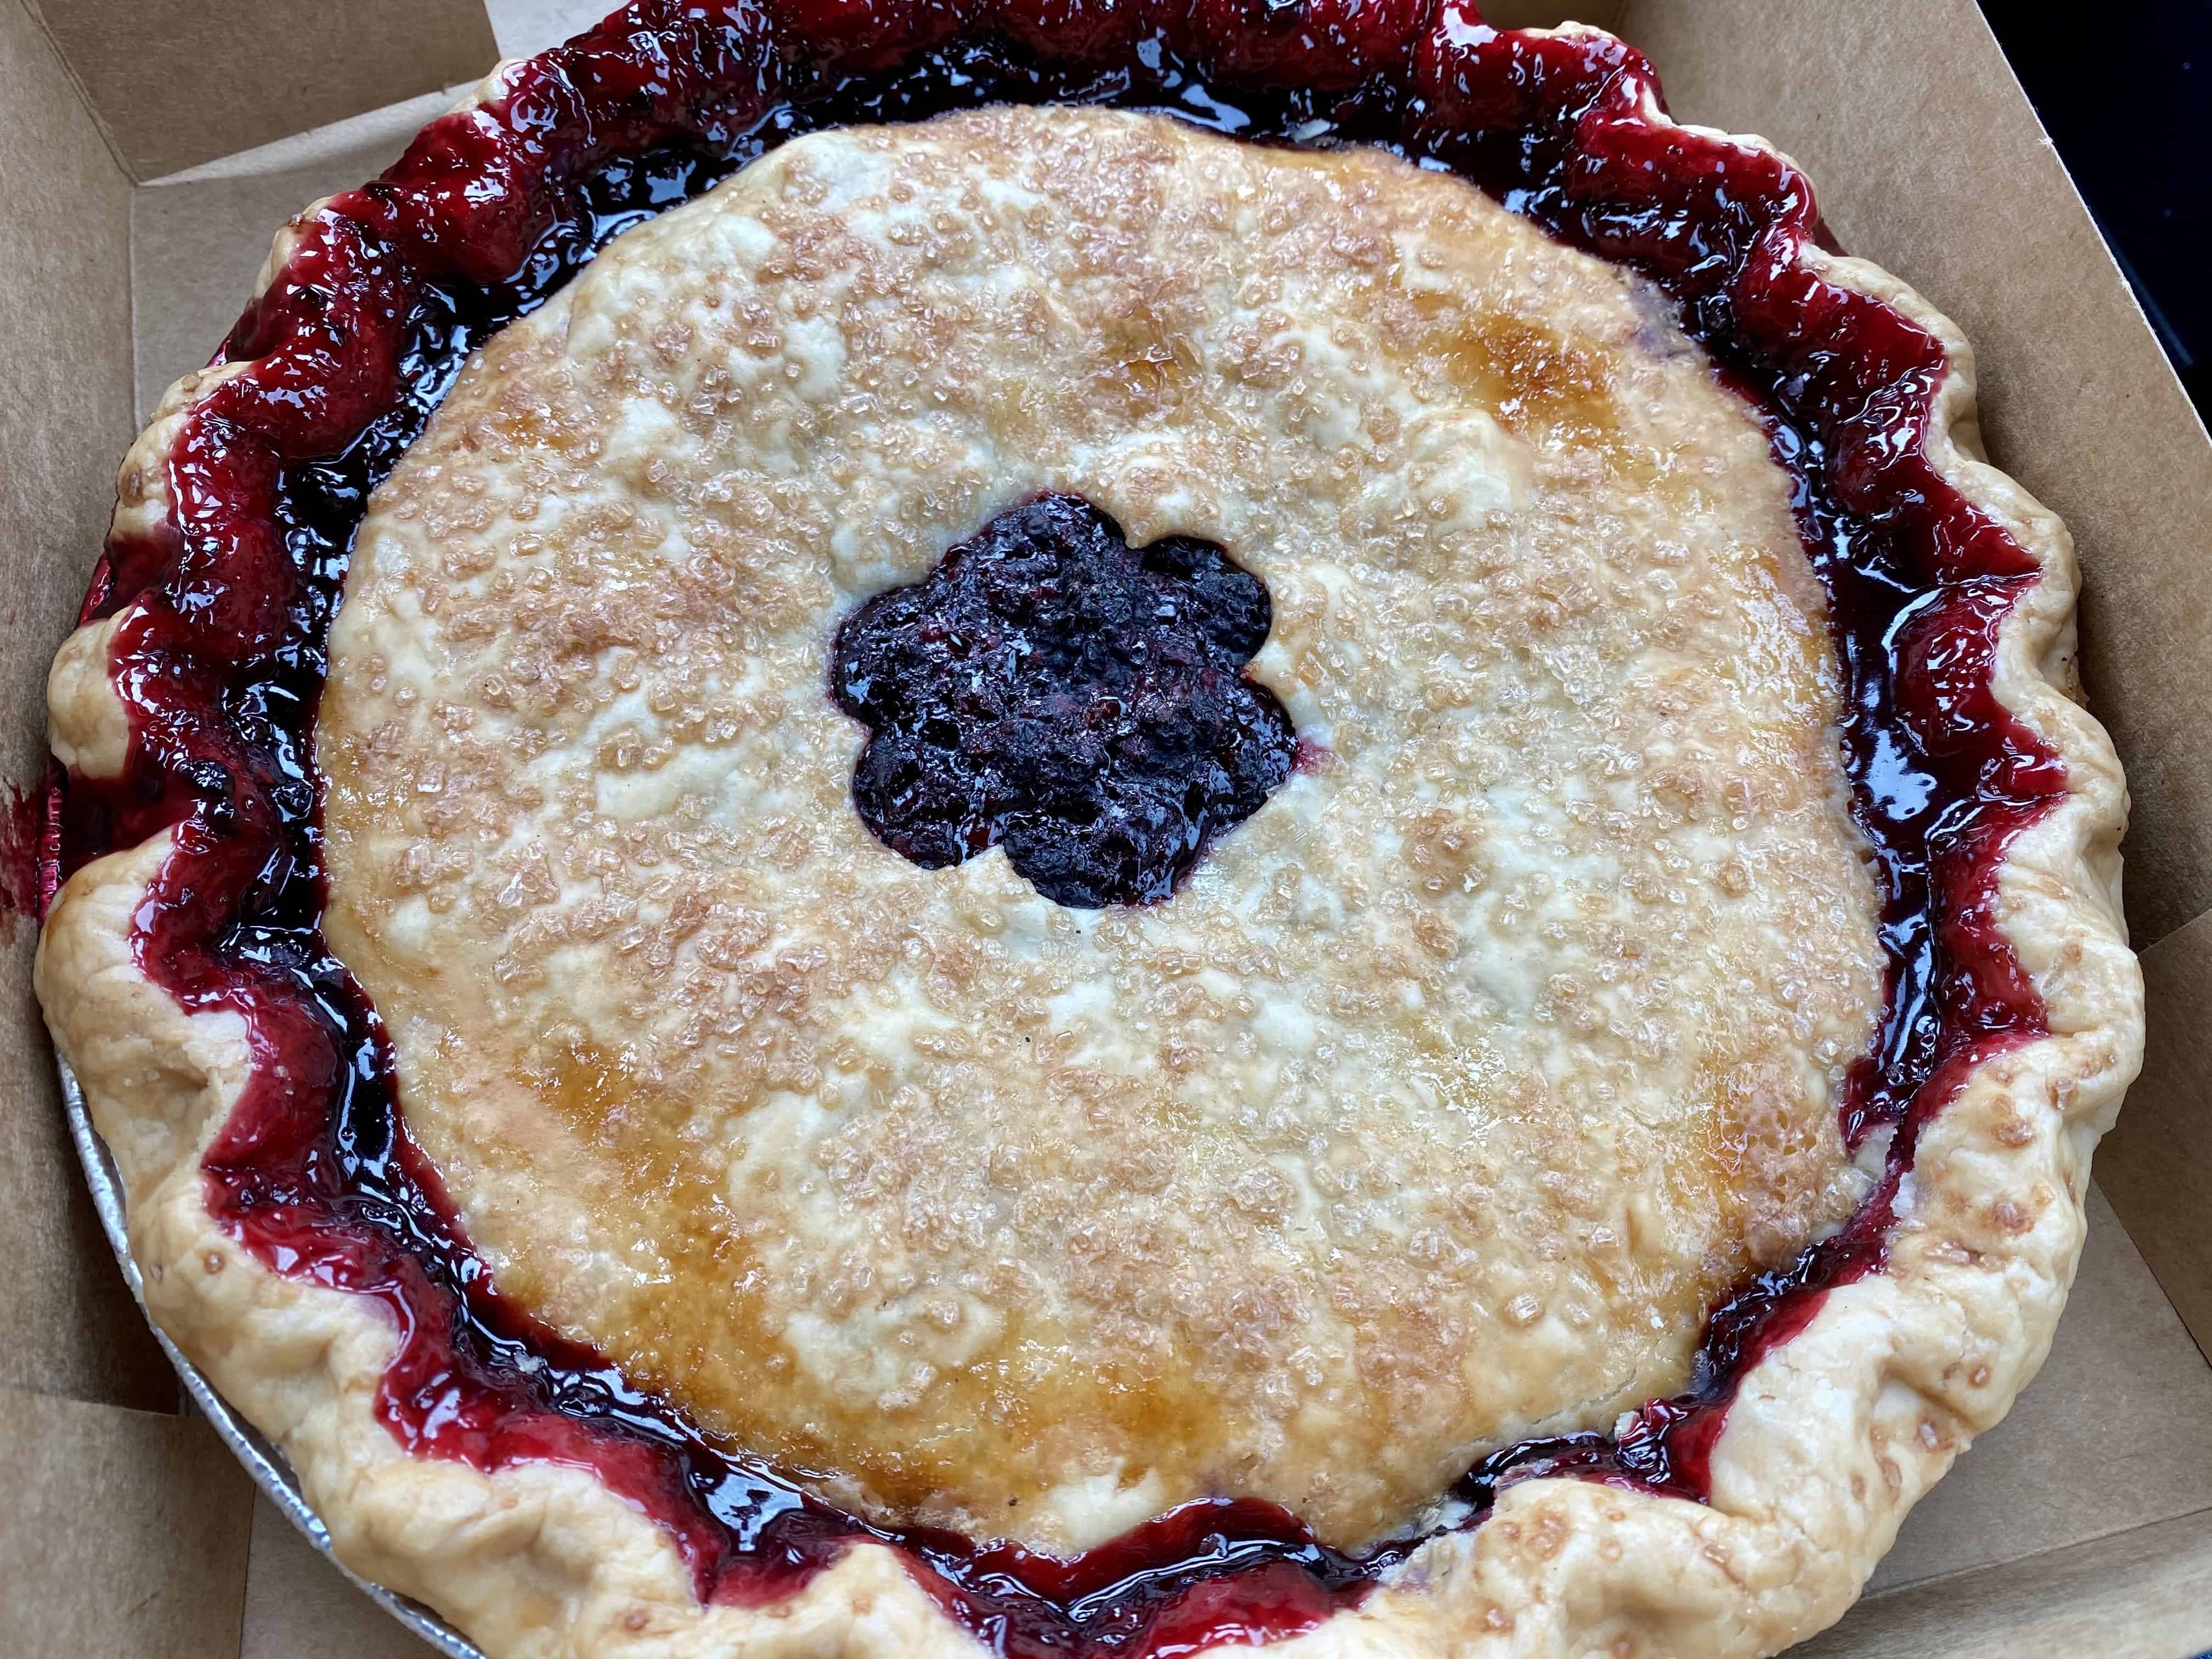 Whidbey Pies Marionberry Pie